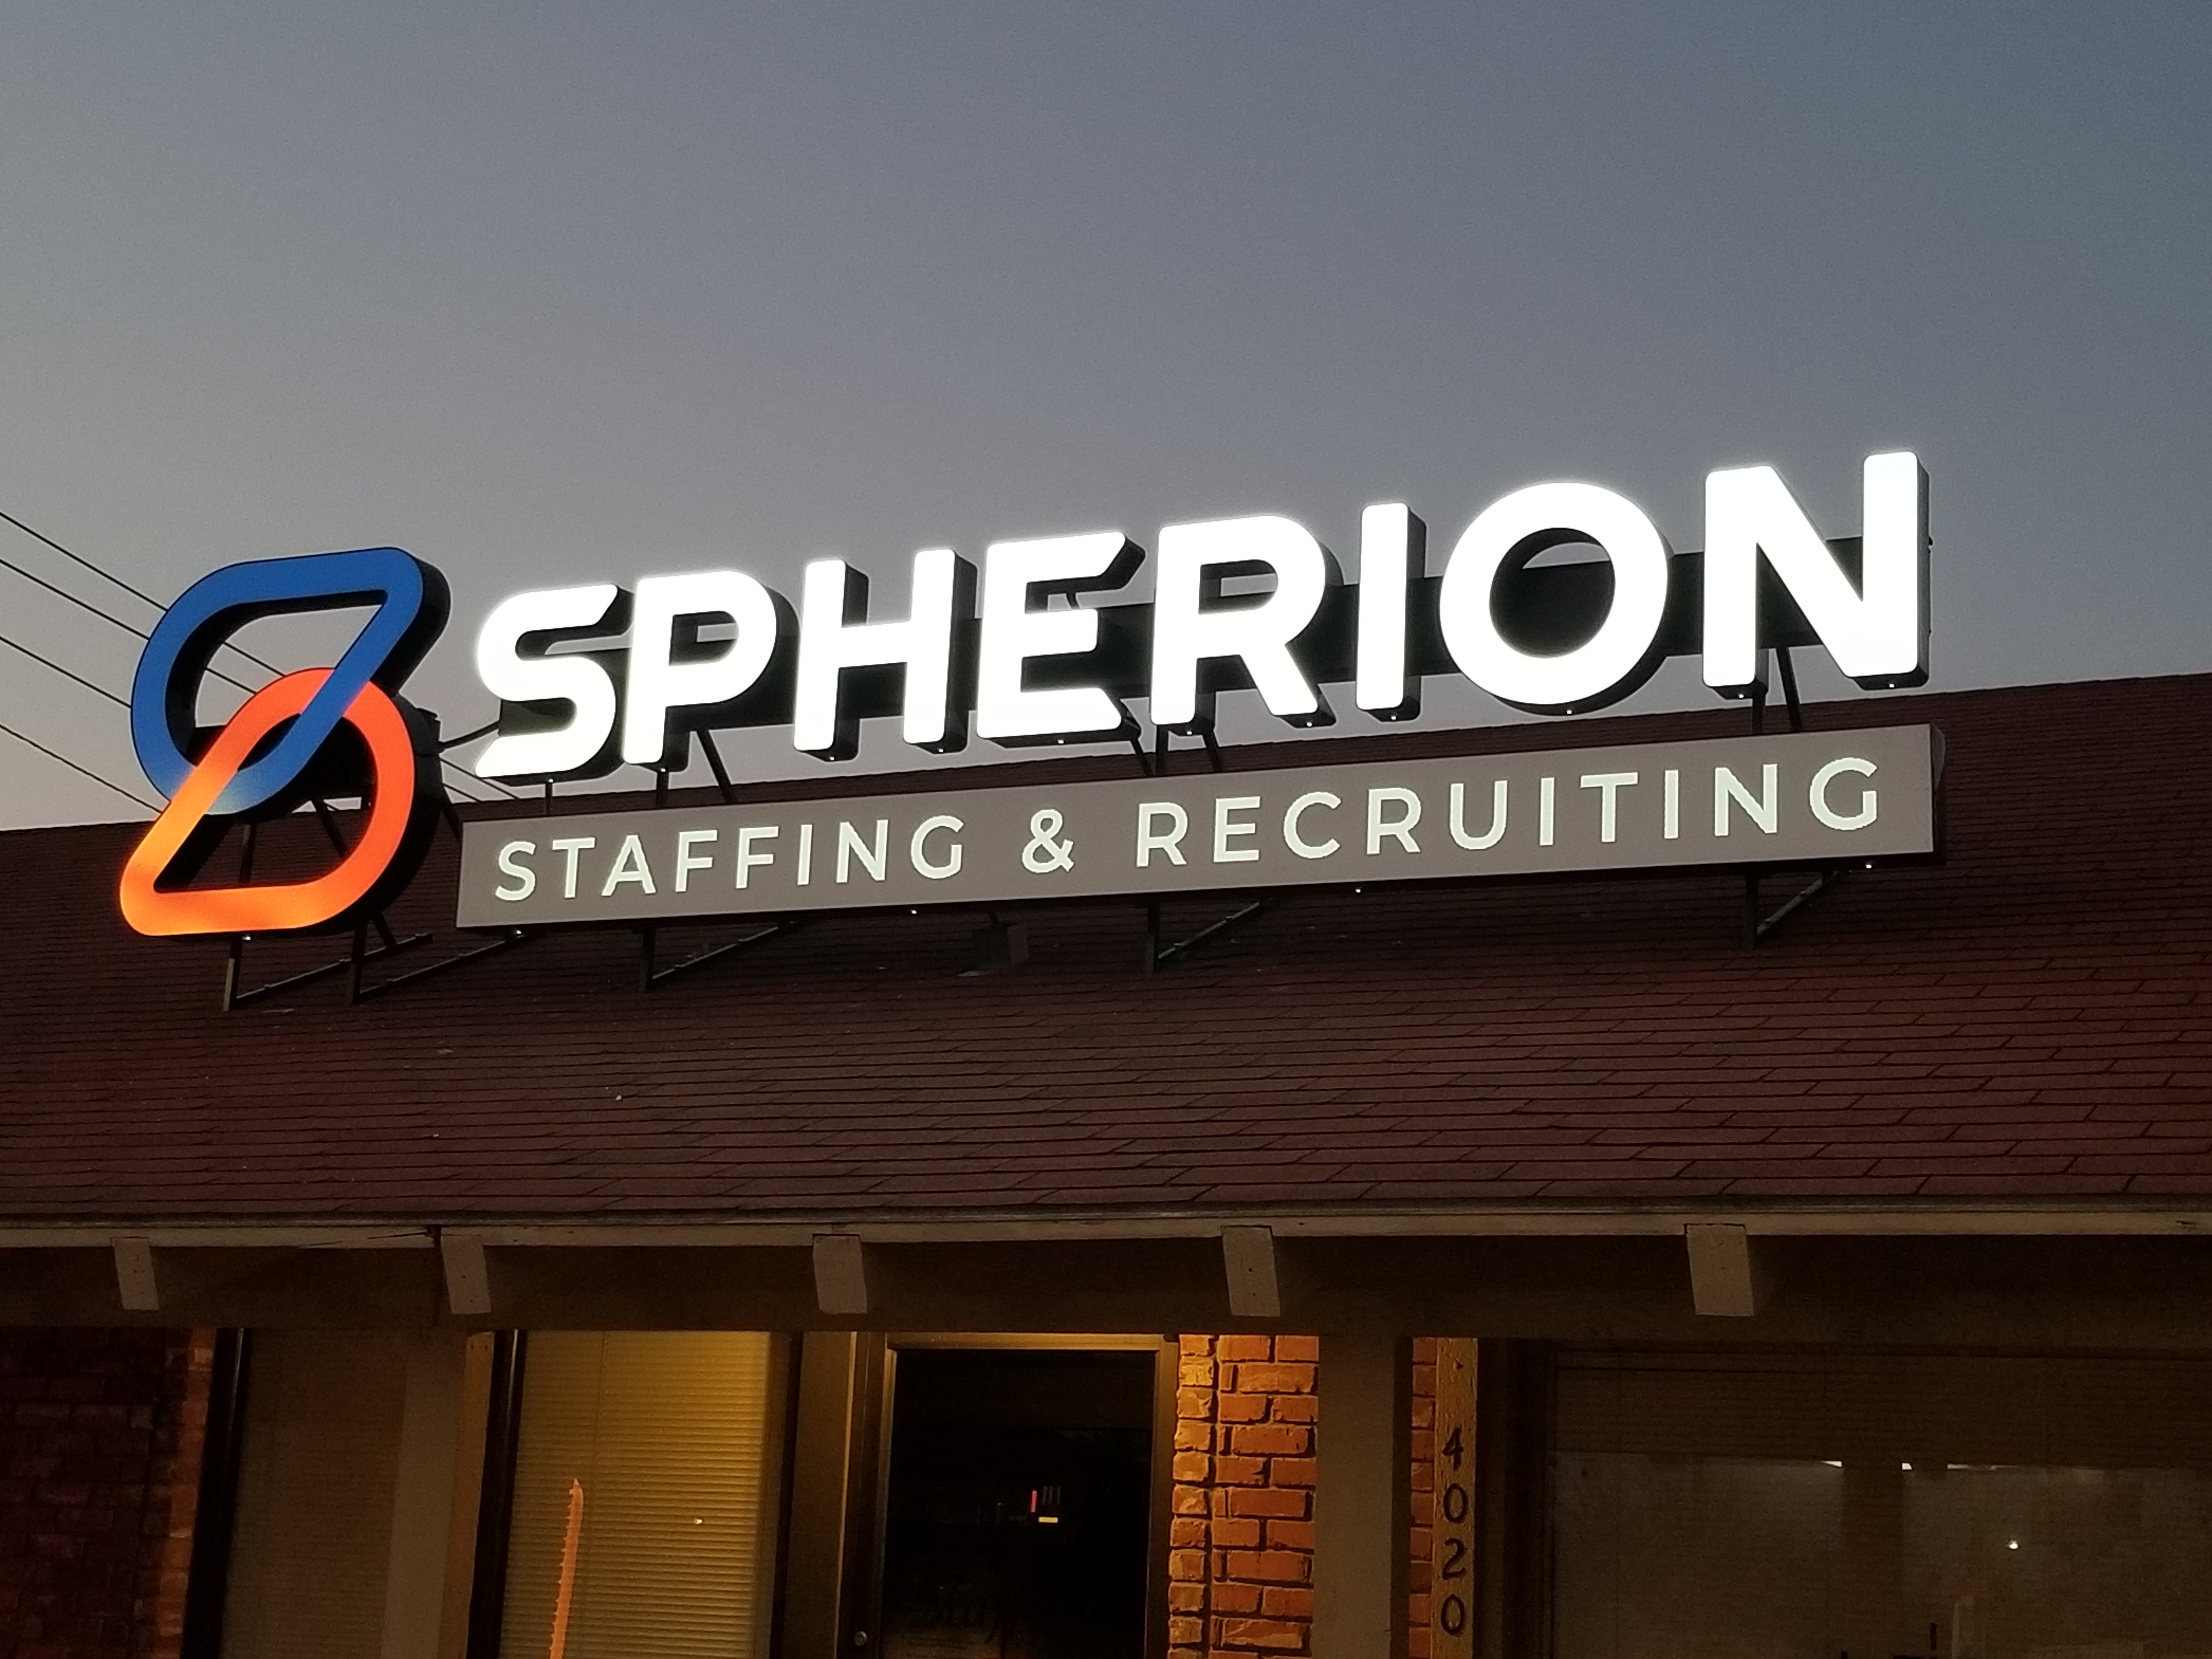 Spherion sign outside the Wichita Falls, TX office against a twilight sky